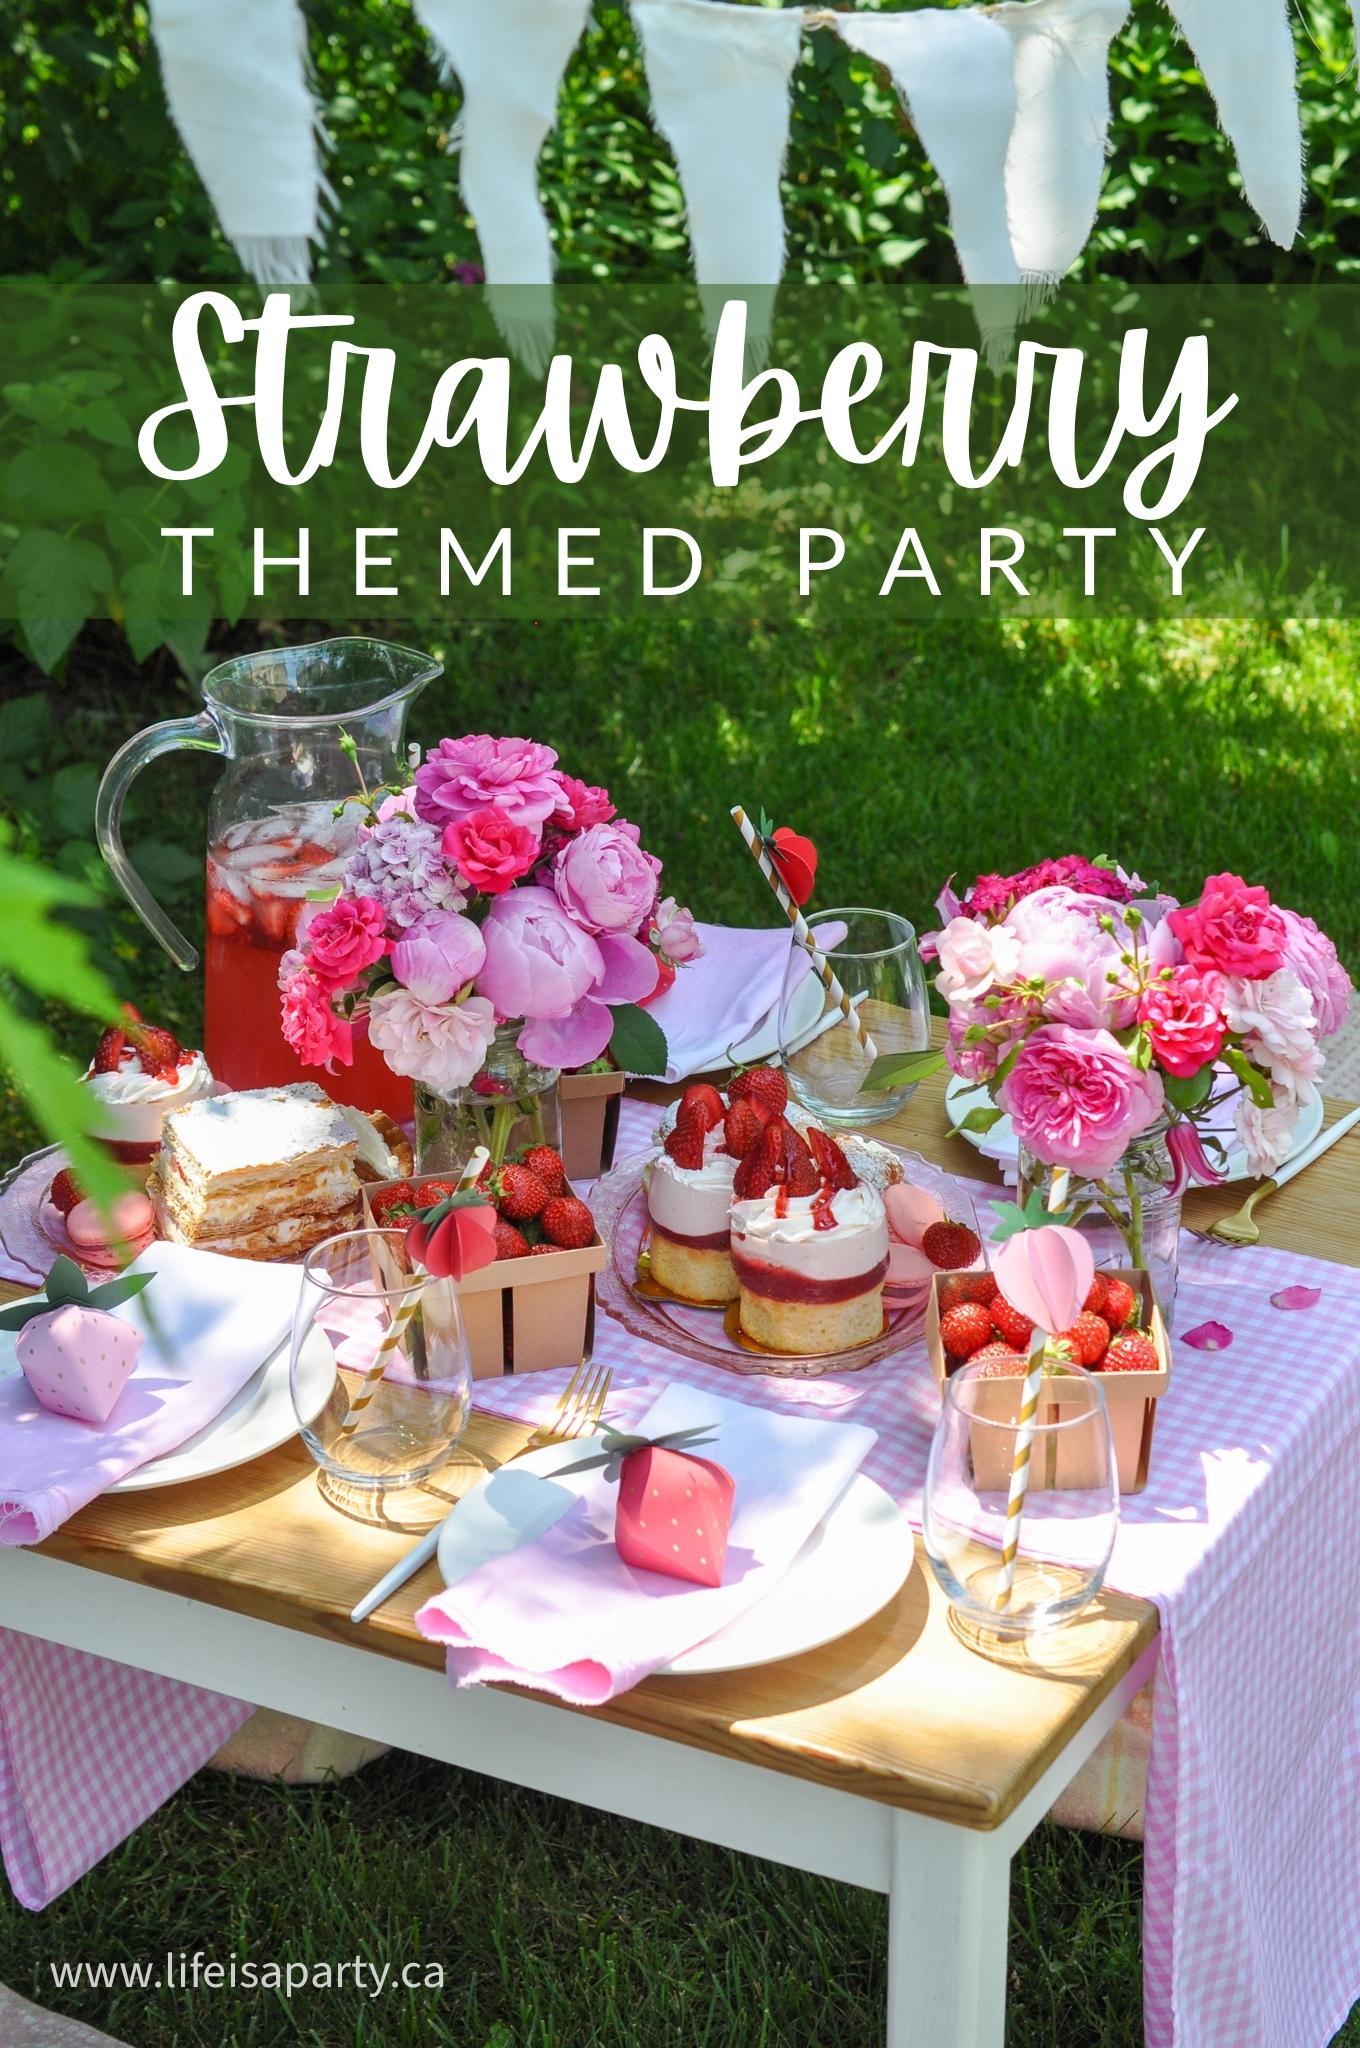 Sweet Strawberry Theme Party